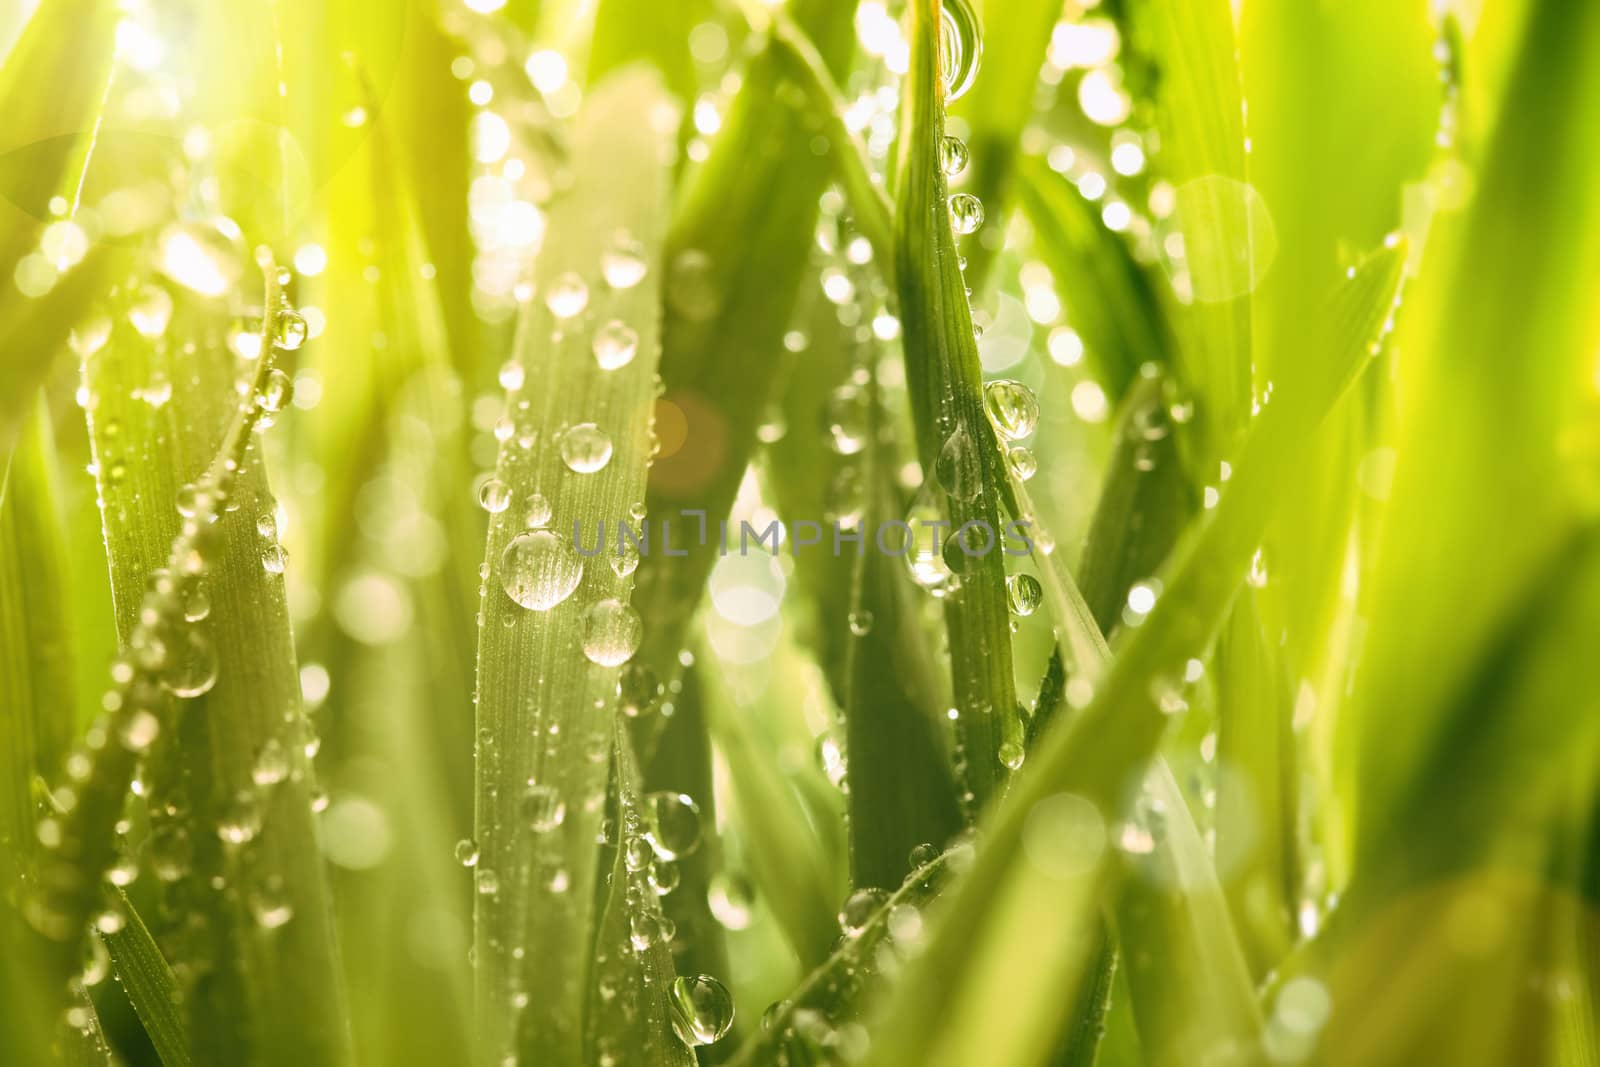 Droplets of water on blades of grass by Sandralise